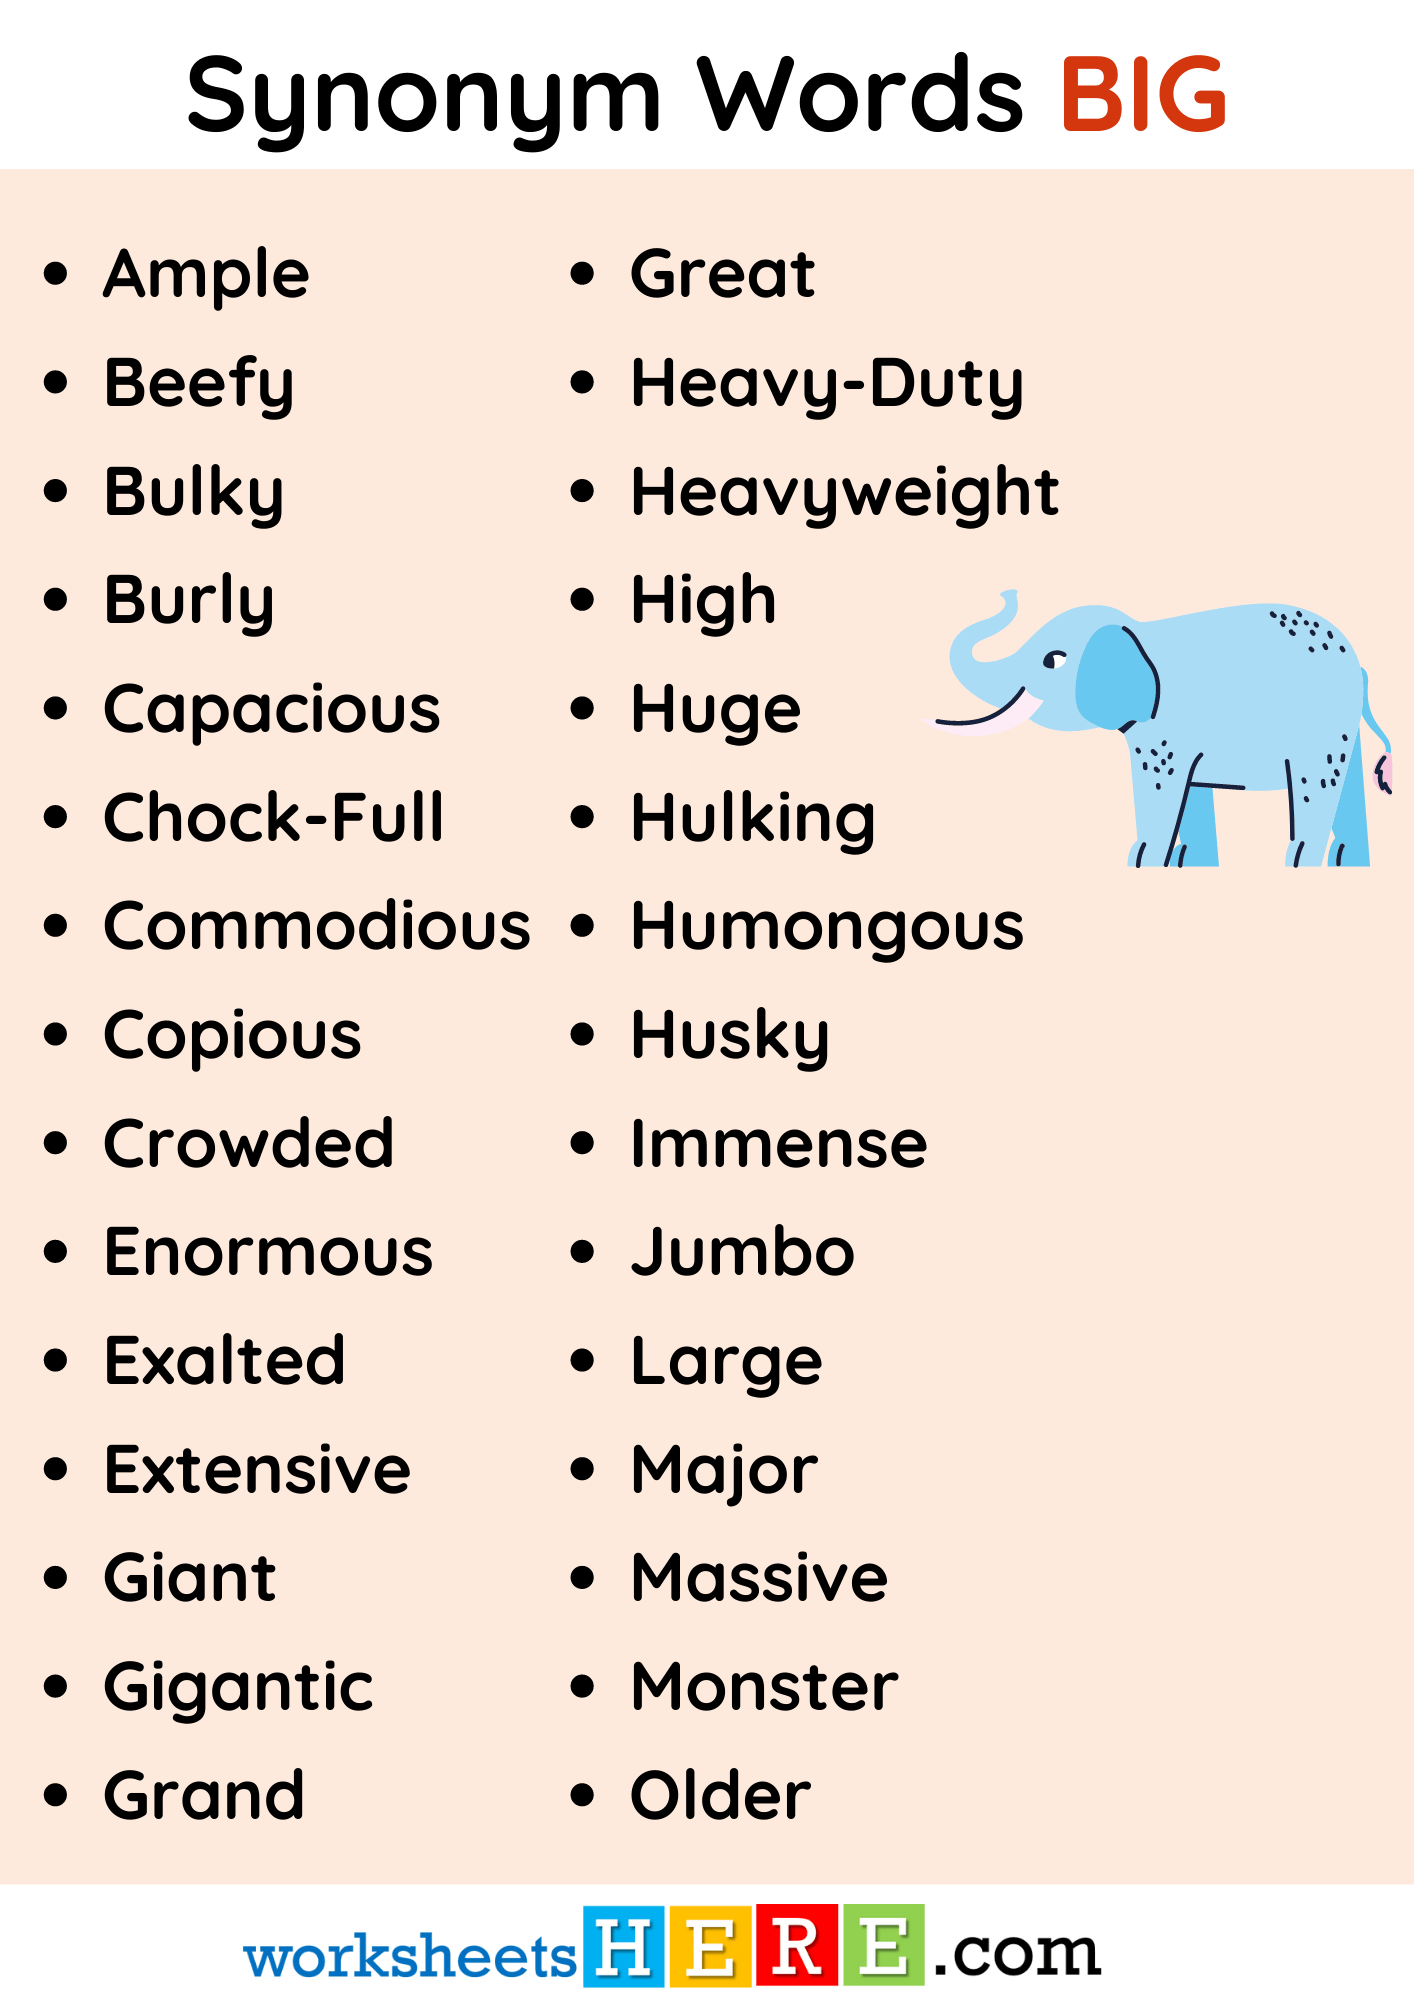 Synonym Words List with BIG in English PDF Worksheet For Students and Kids